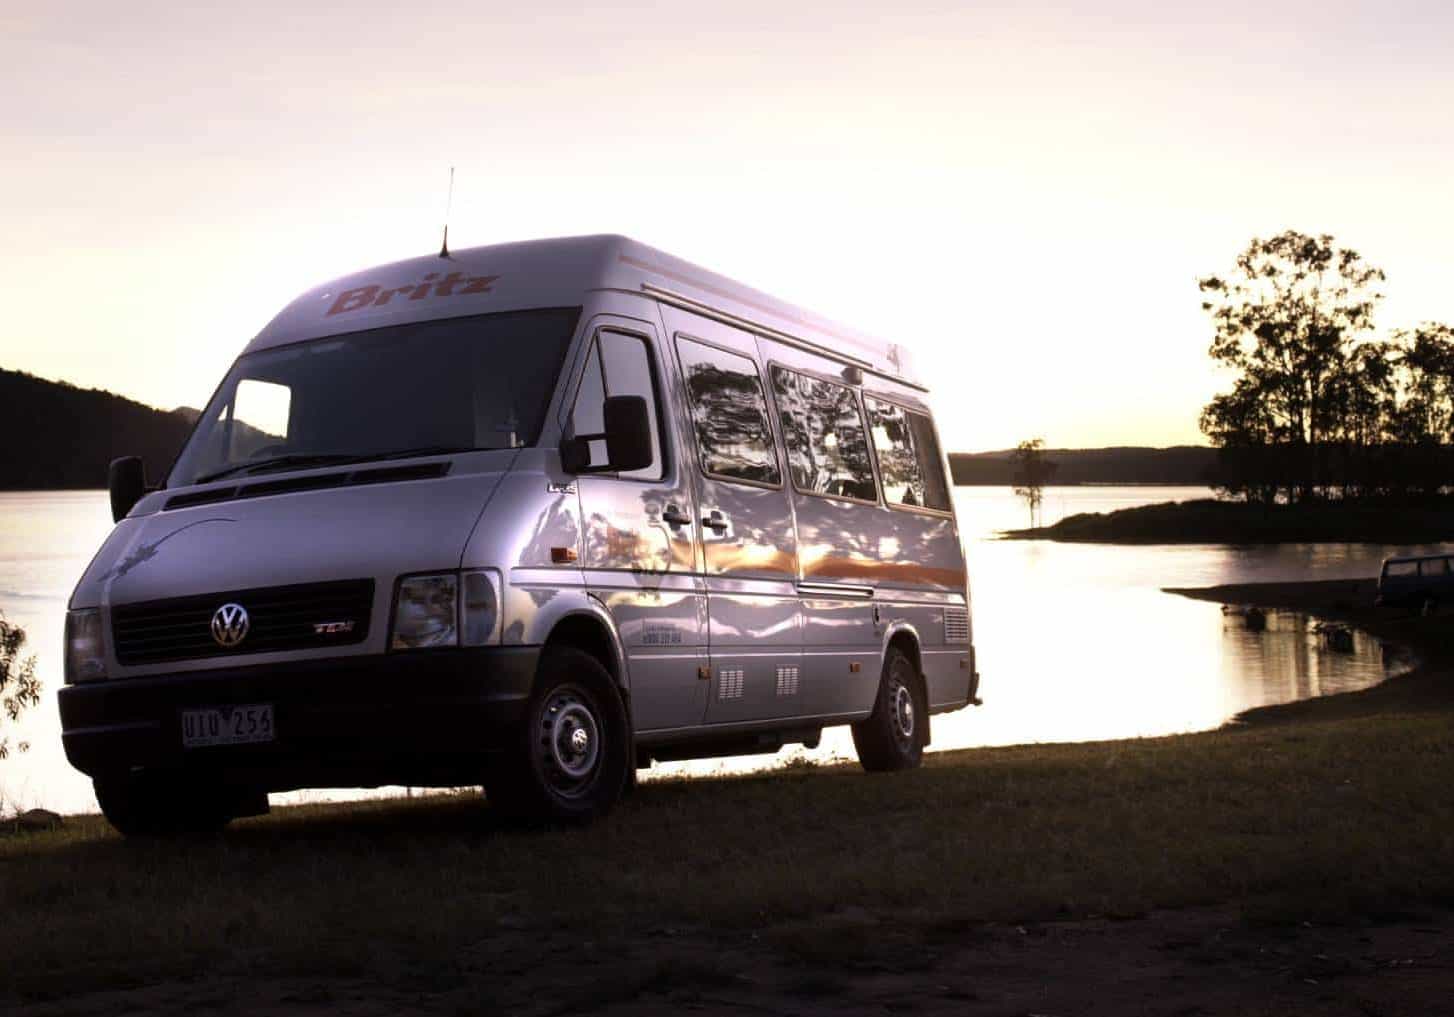 Where to go with your Sydney campervan hire